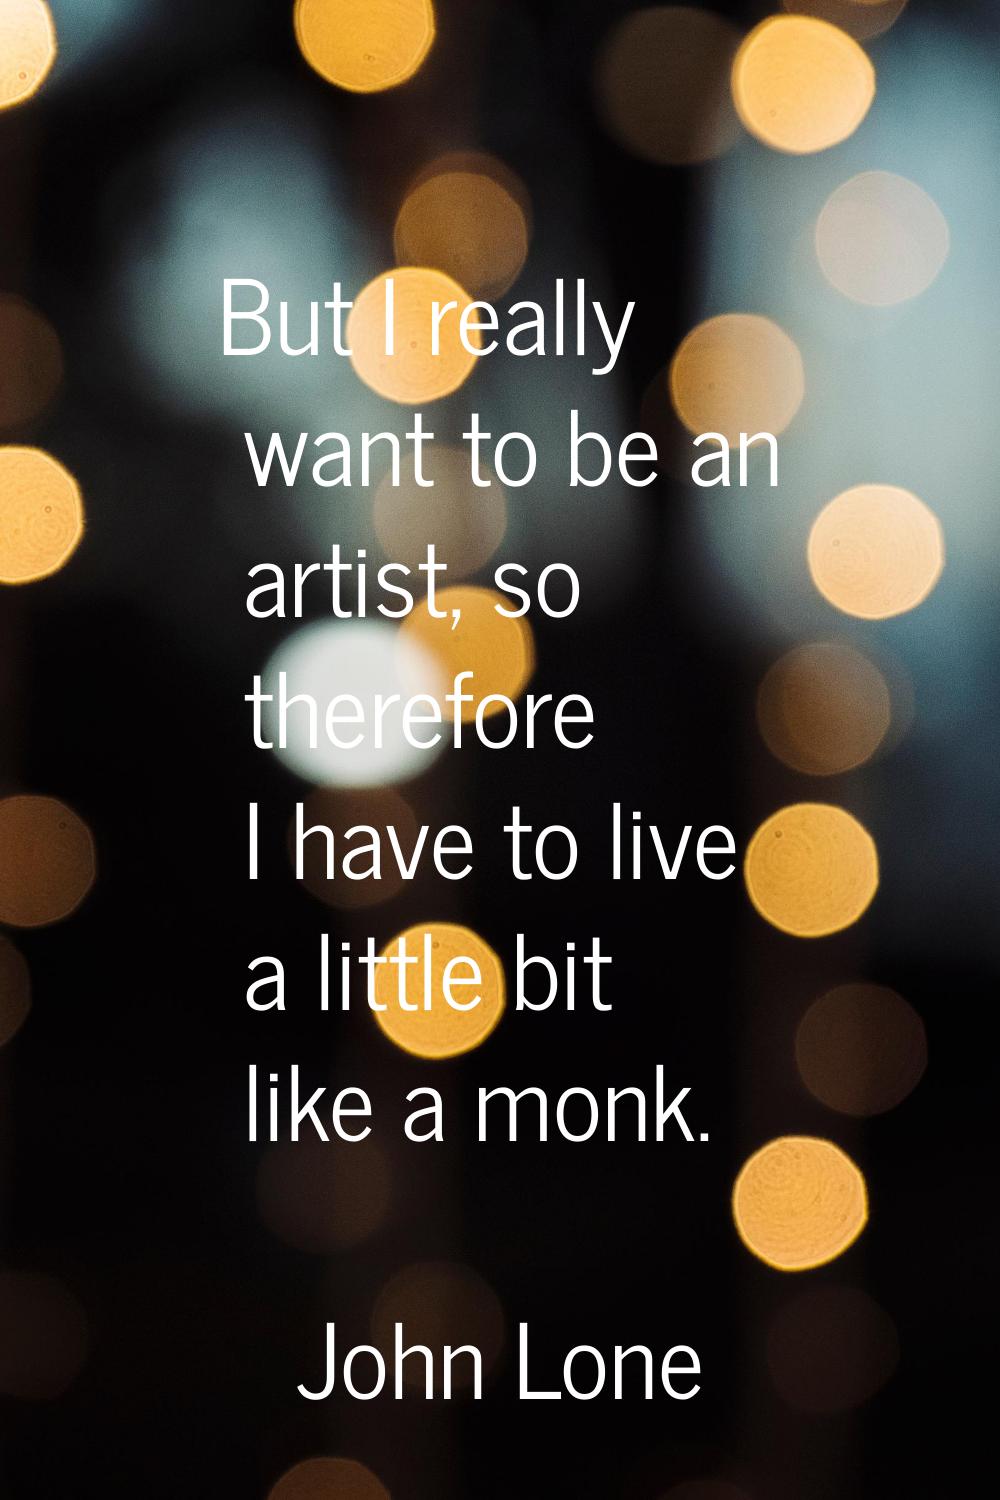 But I really want to be an artist, so therefore I have to live a little bit like a monk.